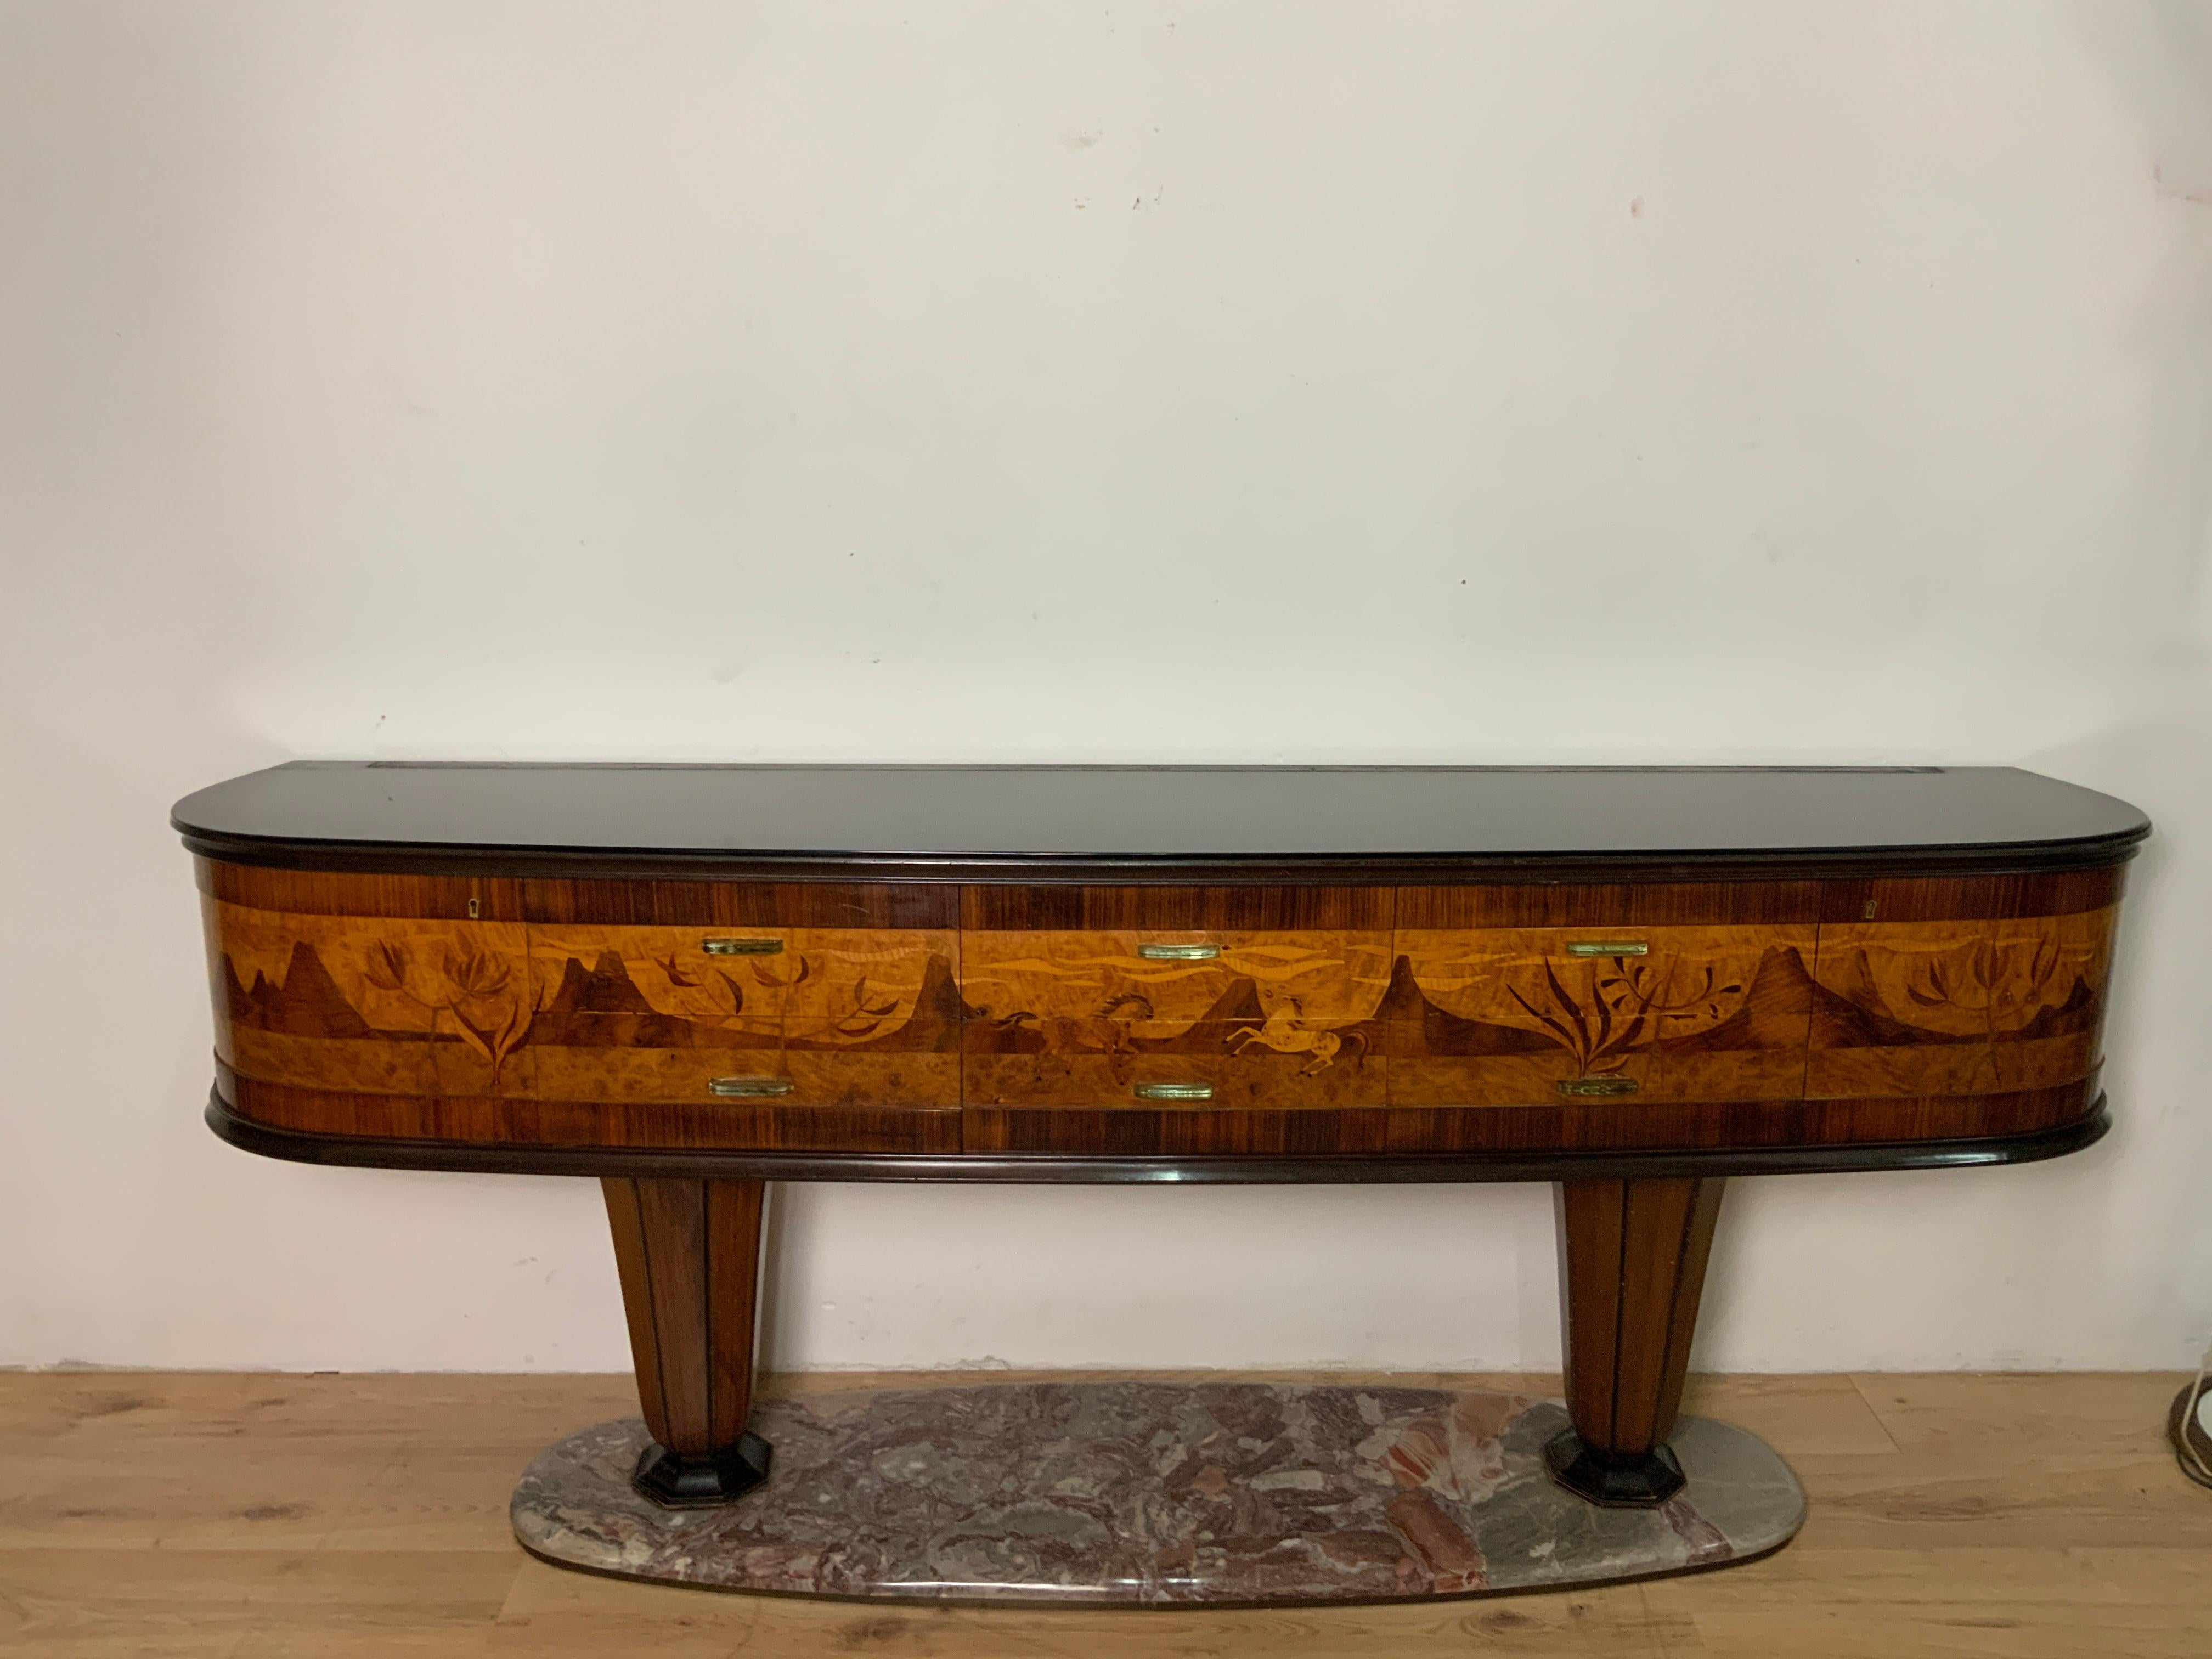 Art Deco inlaid sideboard Italian production of the 1940s attributed to the famous designer Vittorio Dassi.